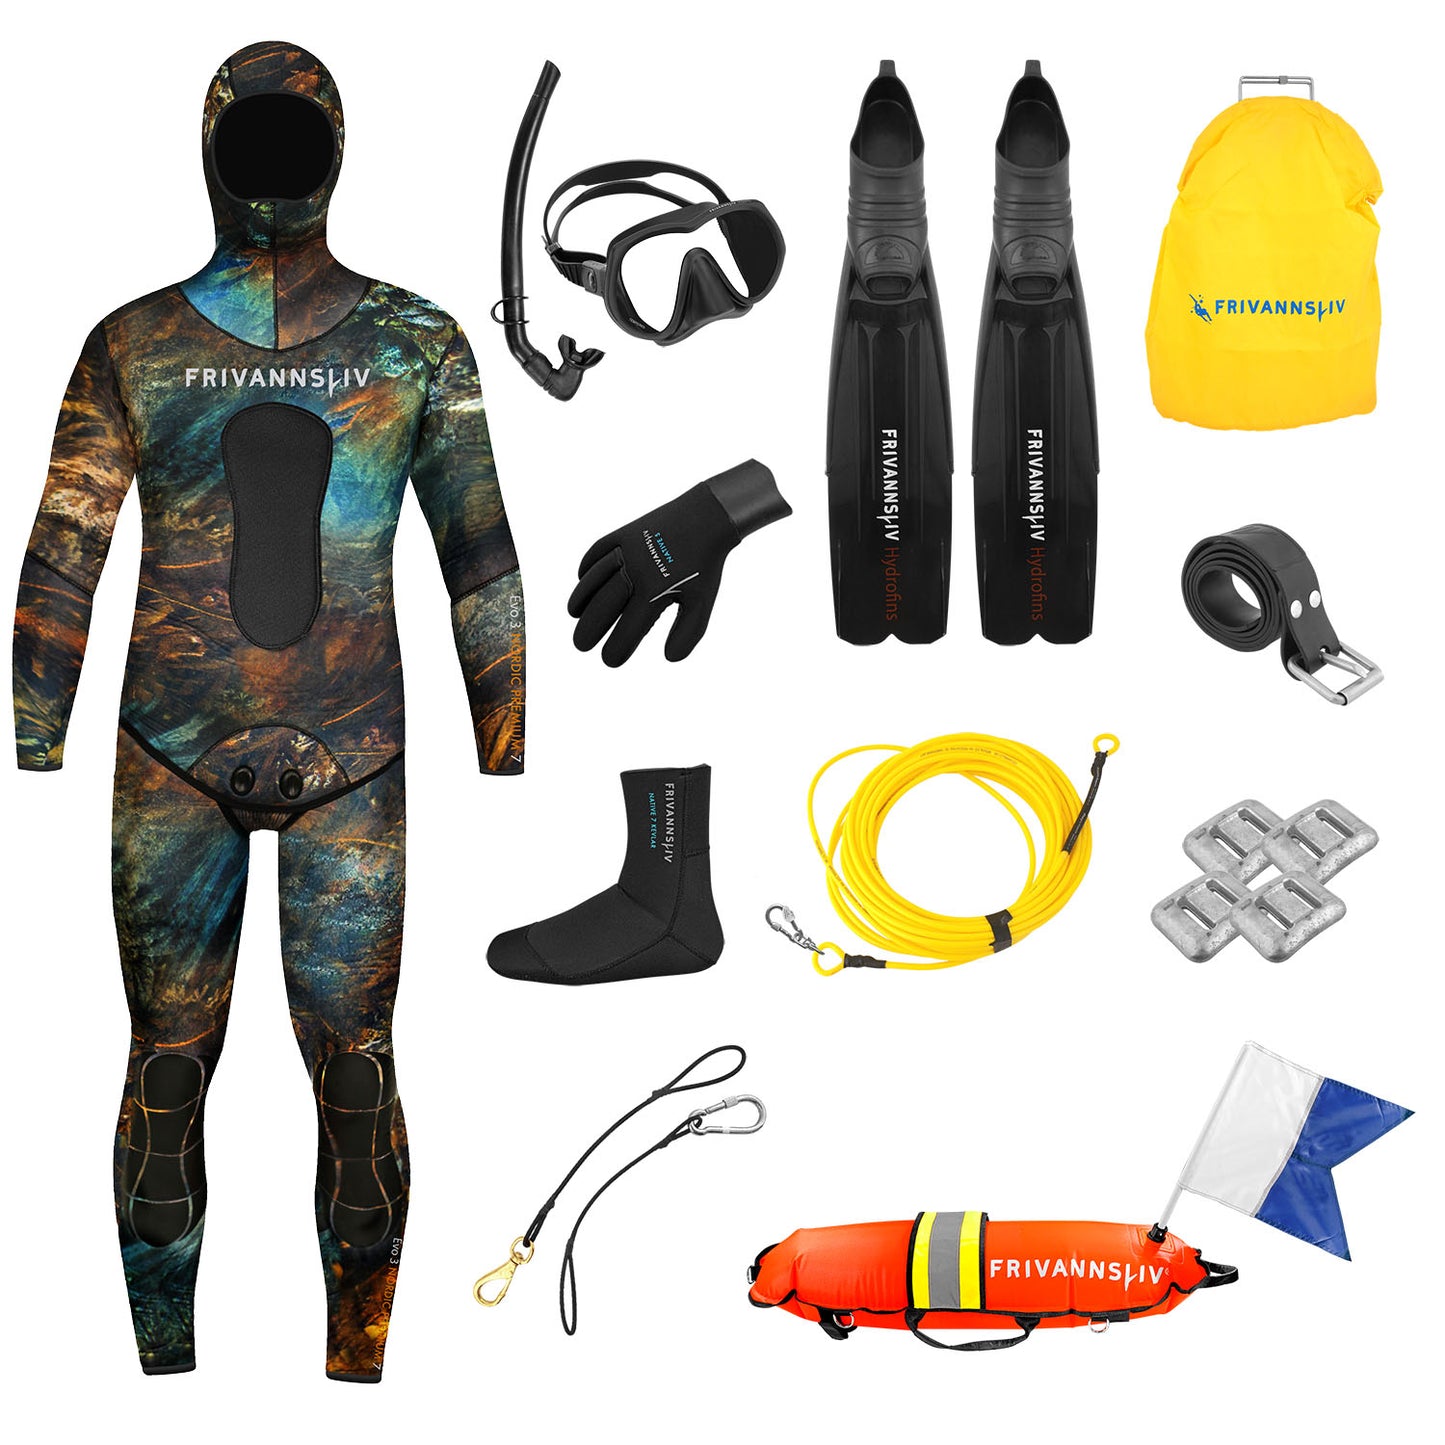 Equipment package free diver plus